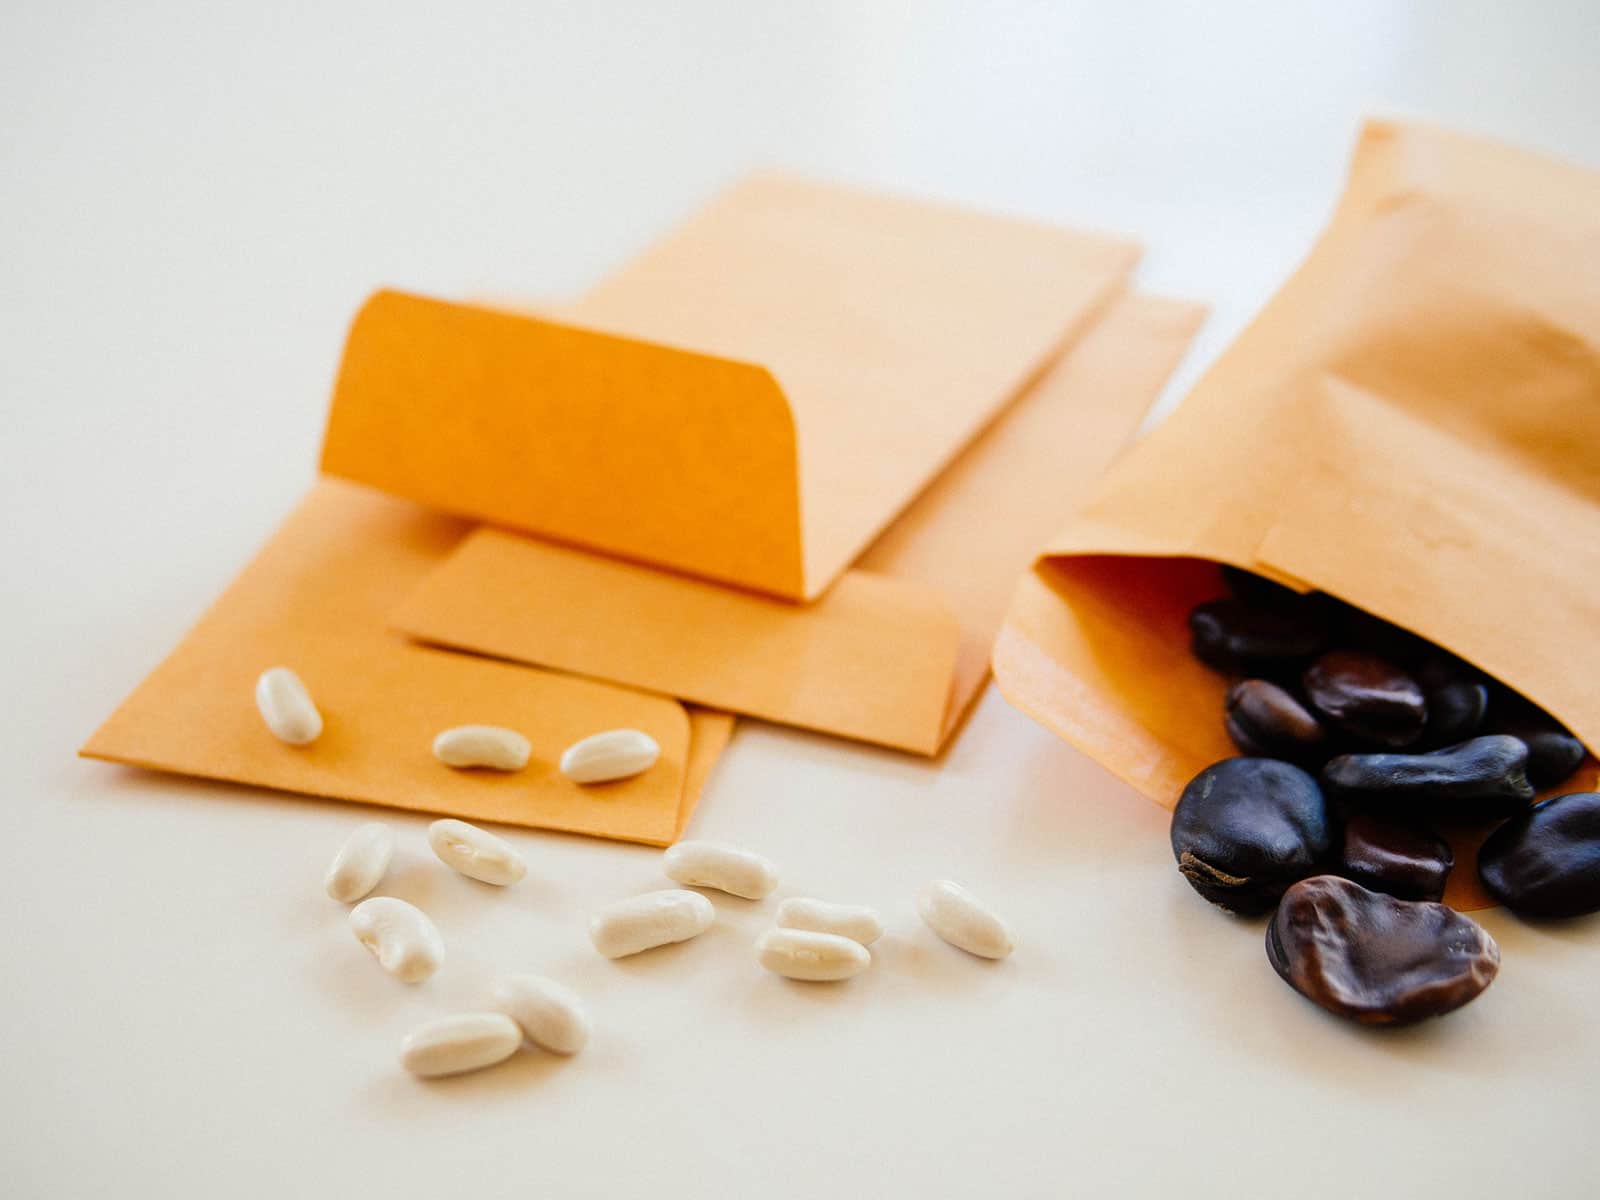 Pea and bean seeds spilling out of small paper envelopes on a table